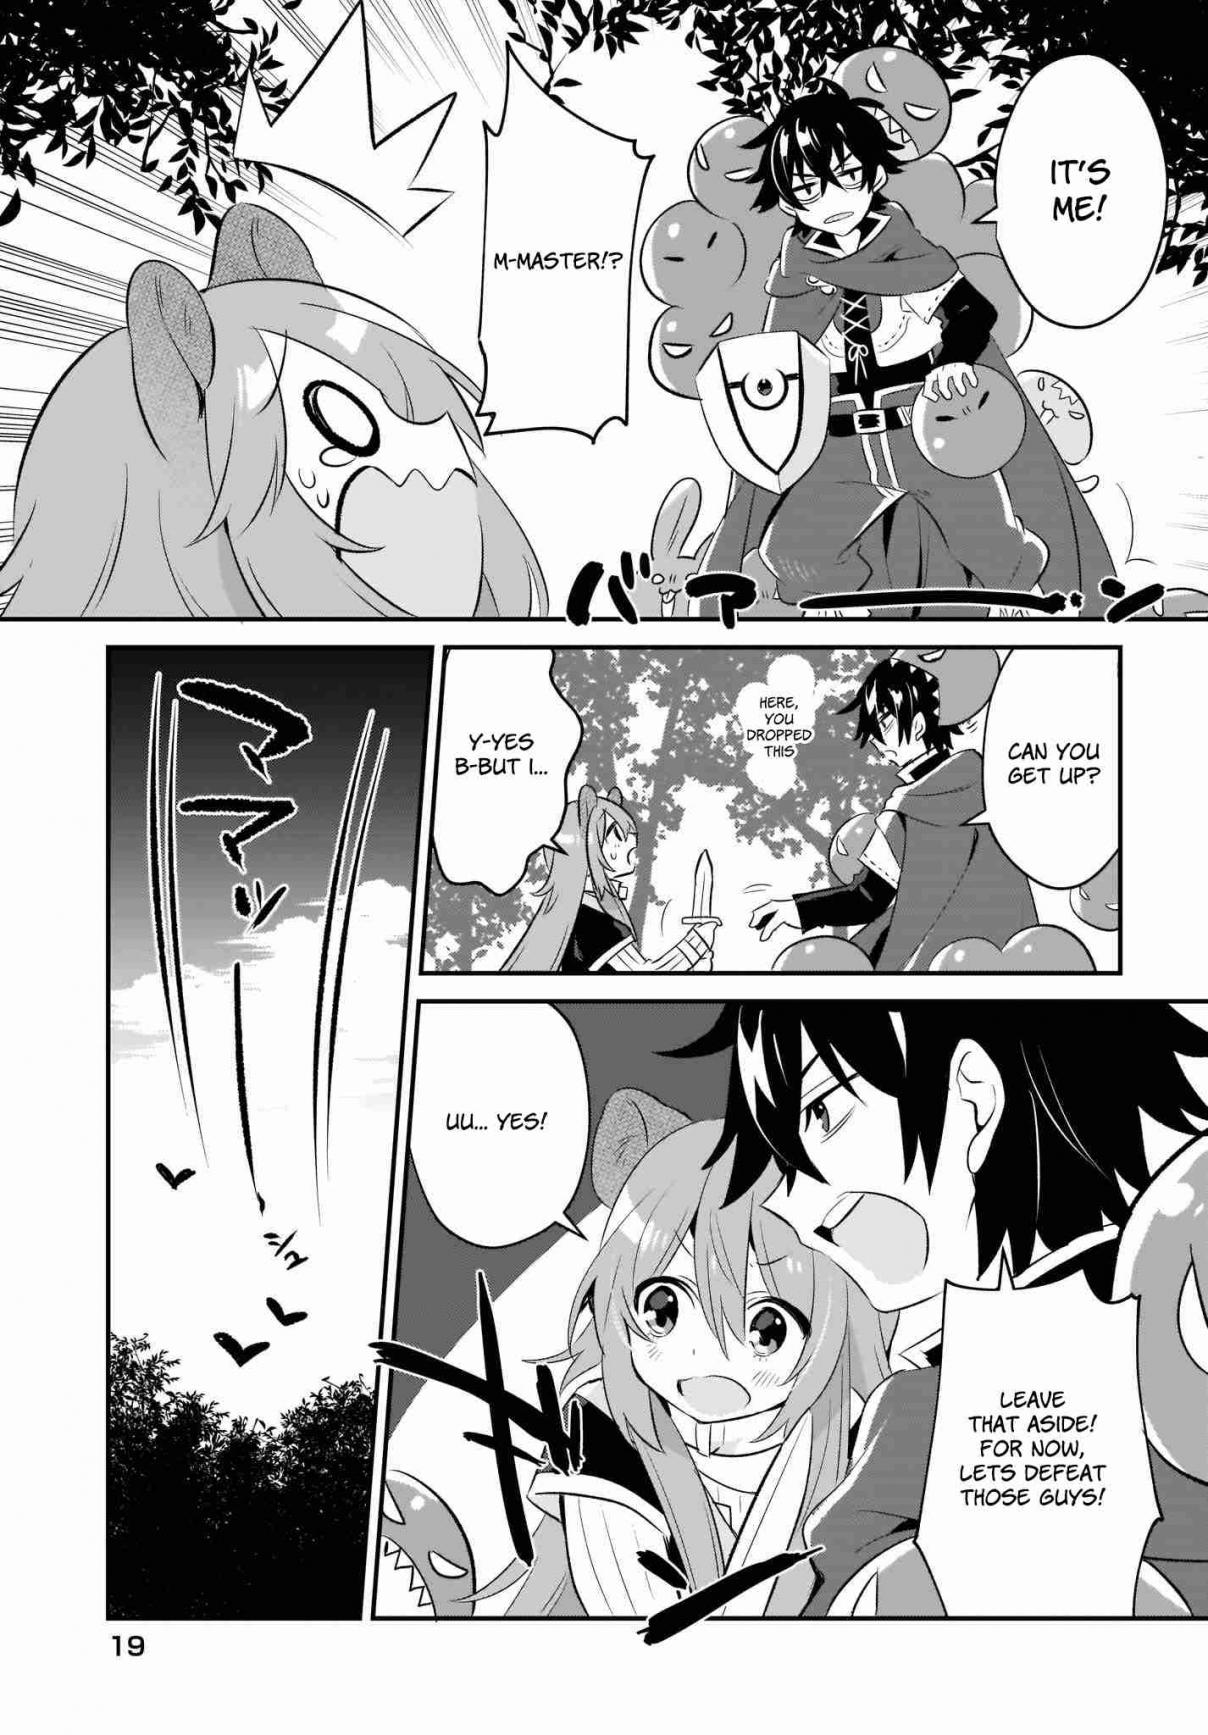 A day in the life of the shield hero Vol. 1 Ch. 1